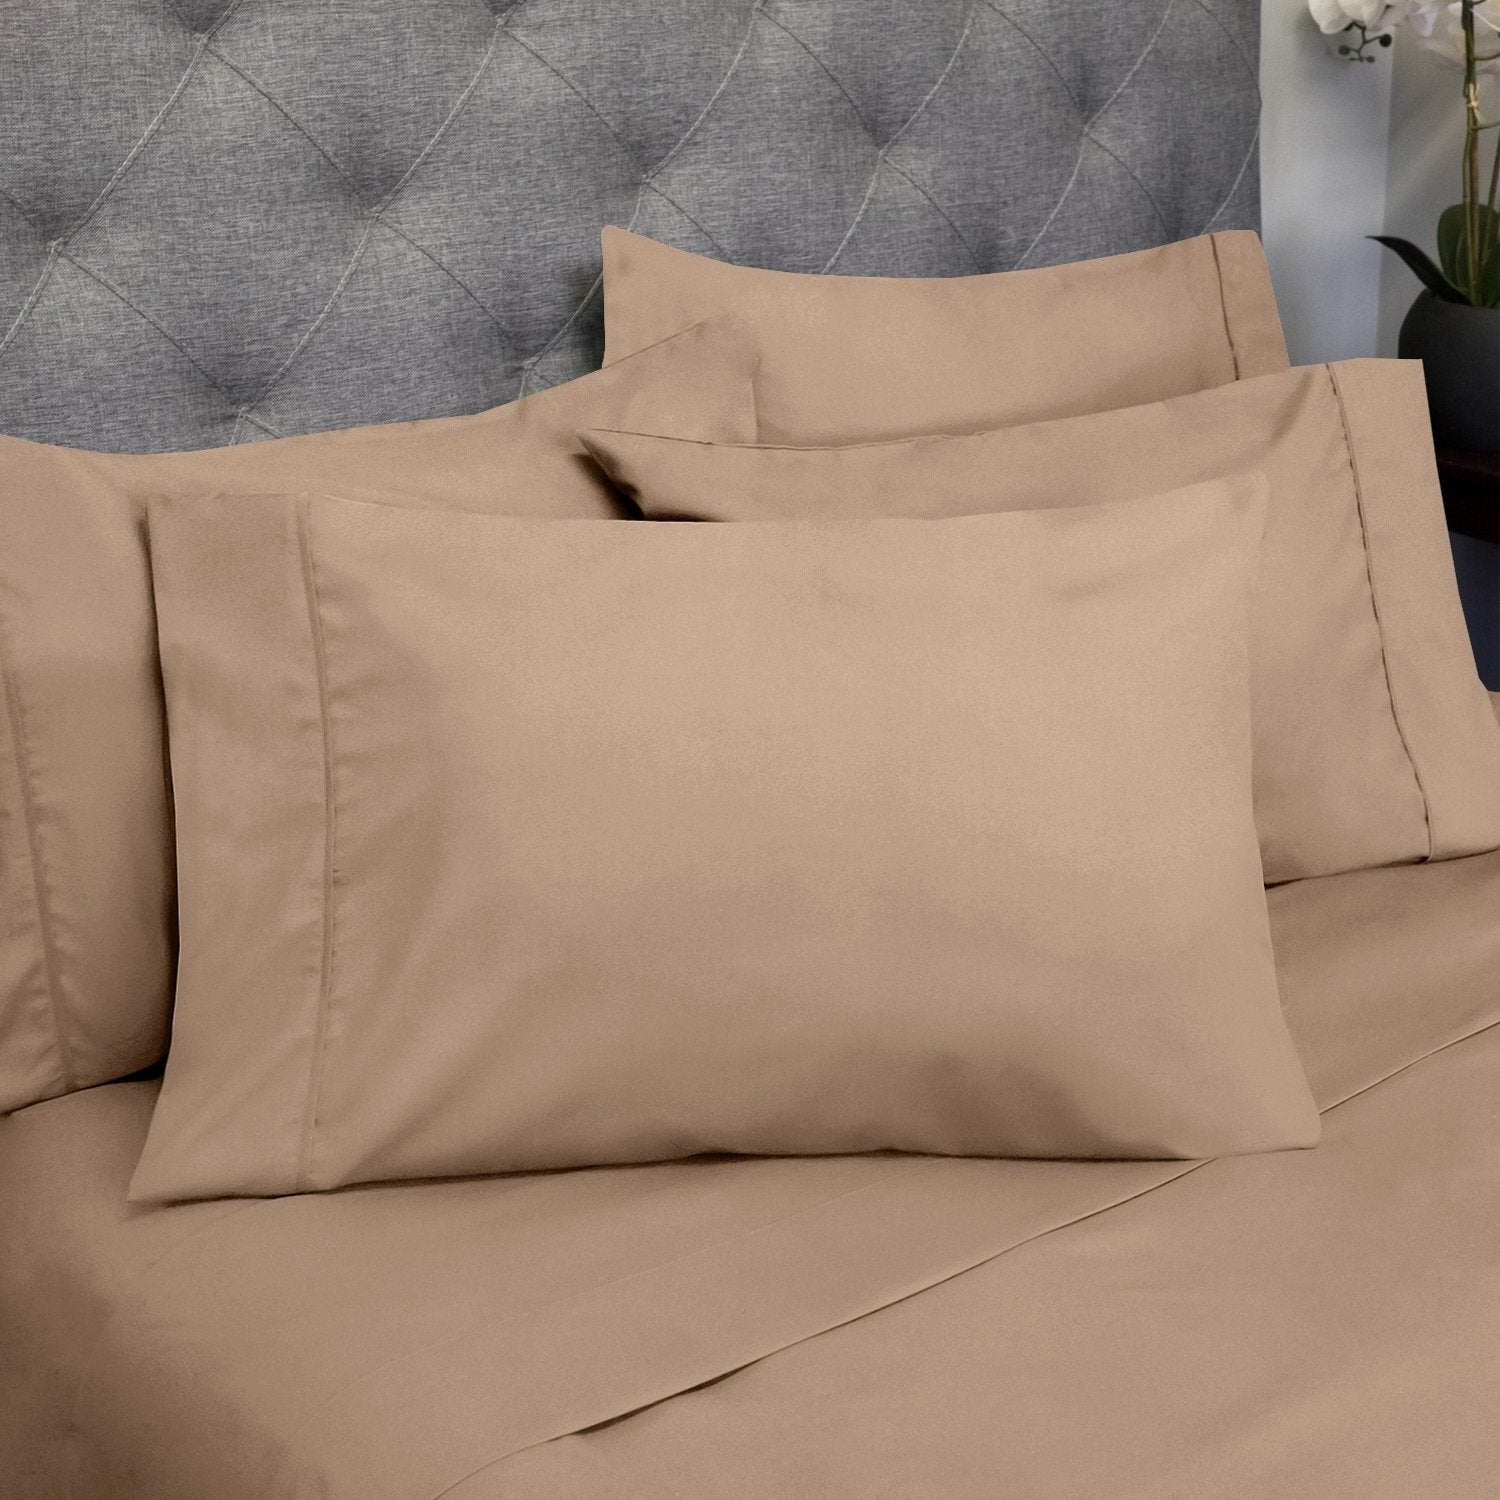 Deluxe 6-Piece Bed Sheet Set (Taupe) - Pillowcases